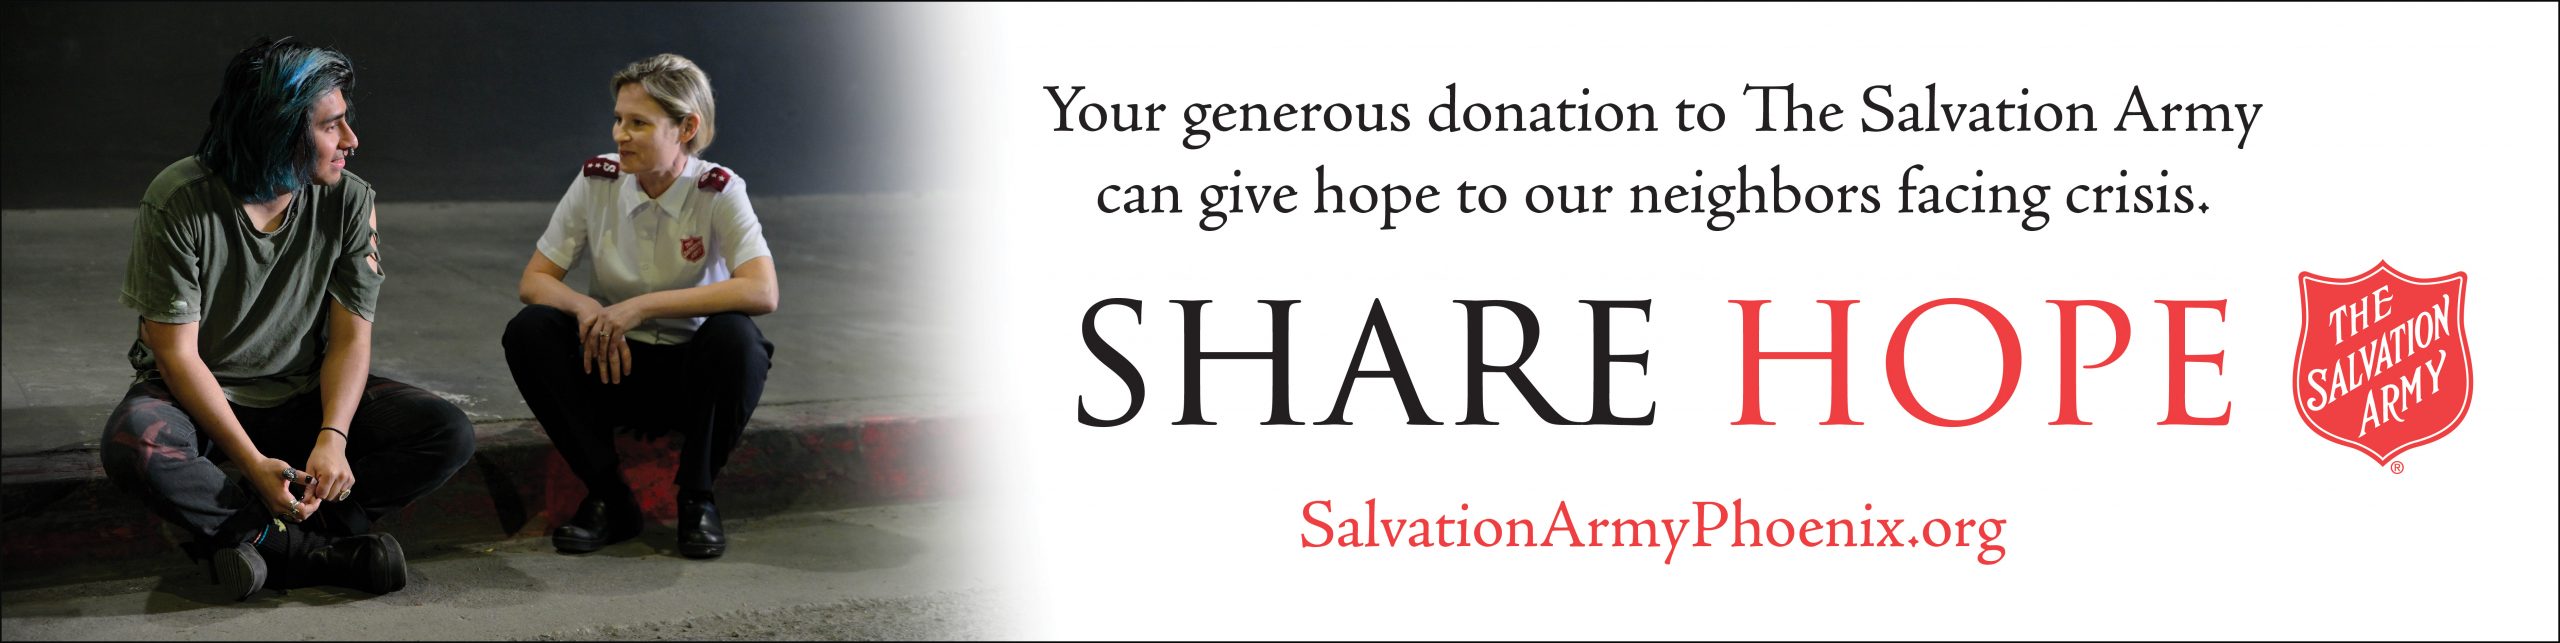 Visit The Salvation Army